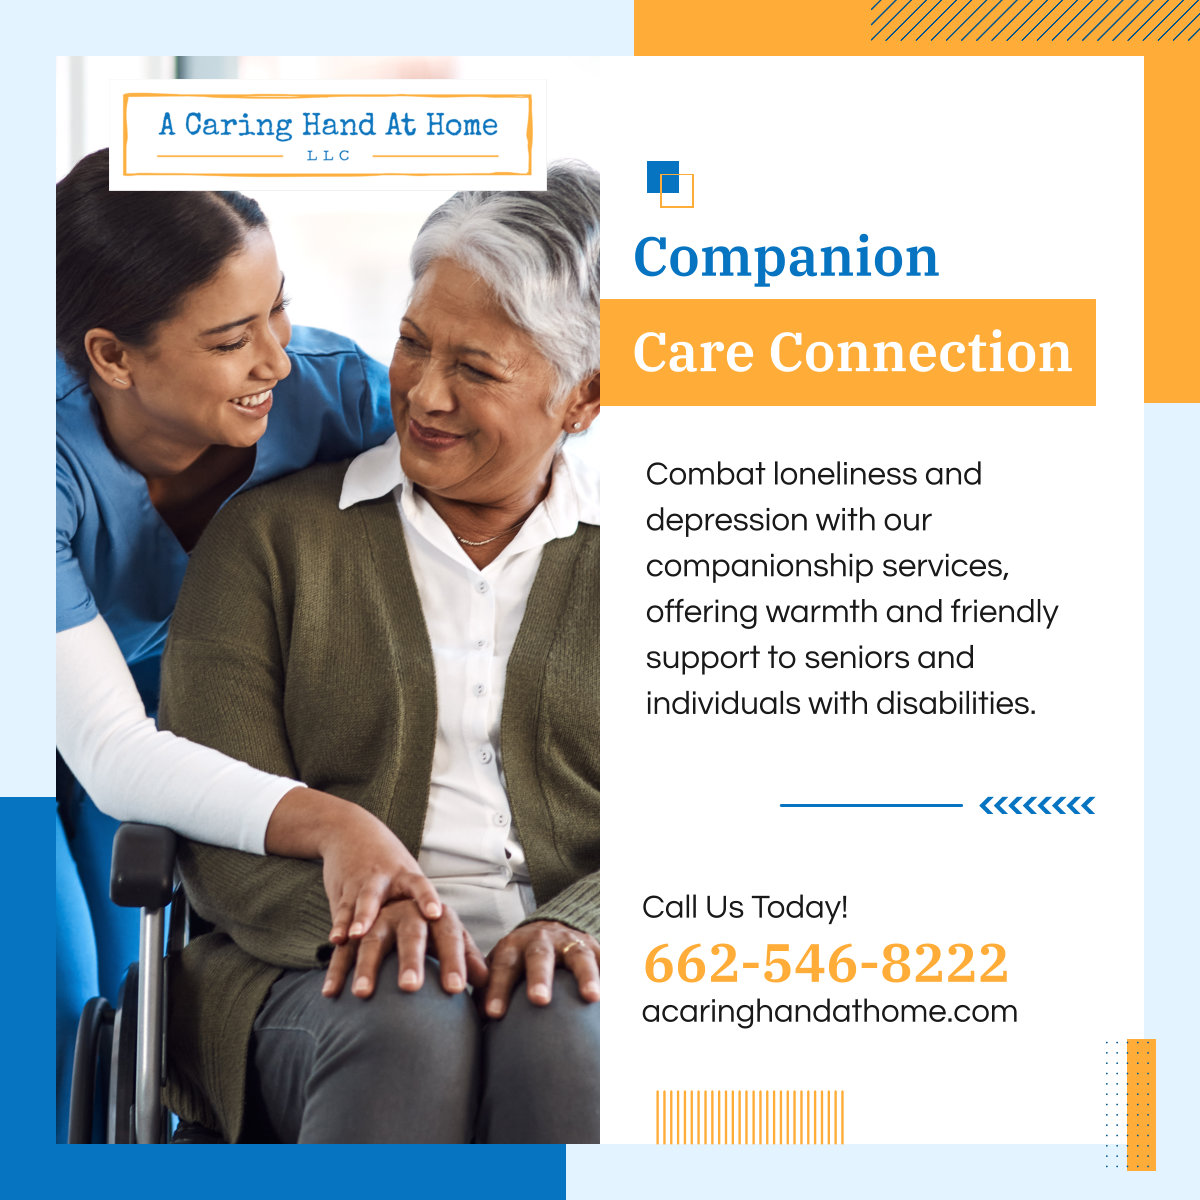 Ensure your loved ones never feel alone with our companion care services, providing them with joyful companionship at home.

Read More: business.facebook.com/photo.php?fbid…

#TupeloMS #HomeCare #CompanionCare